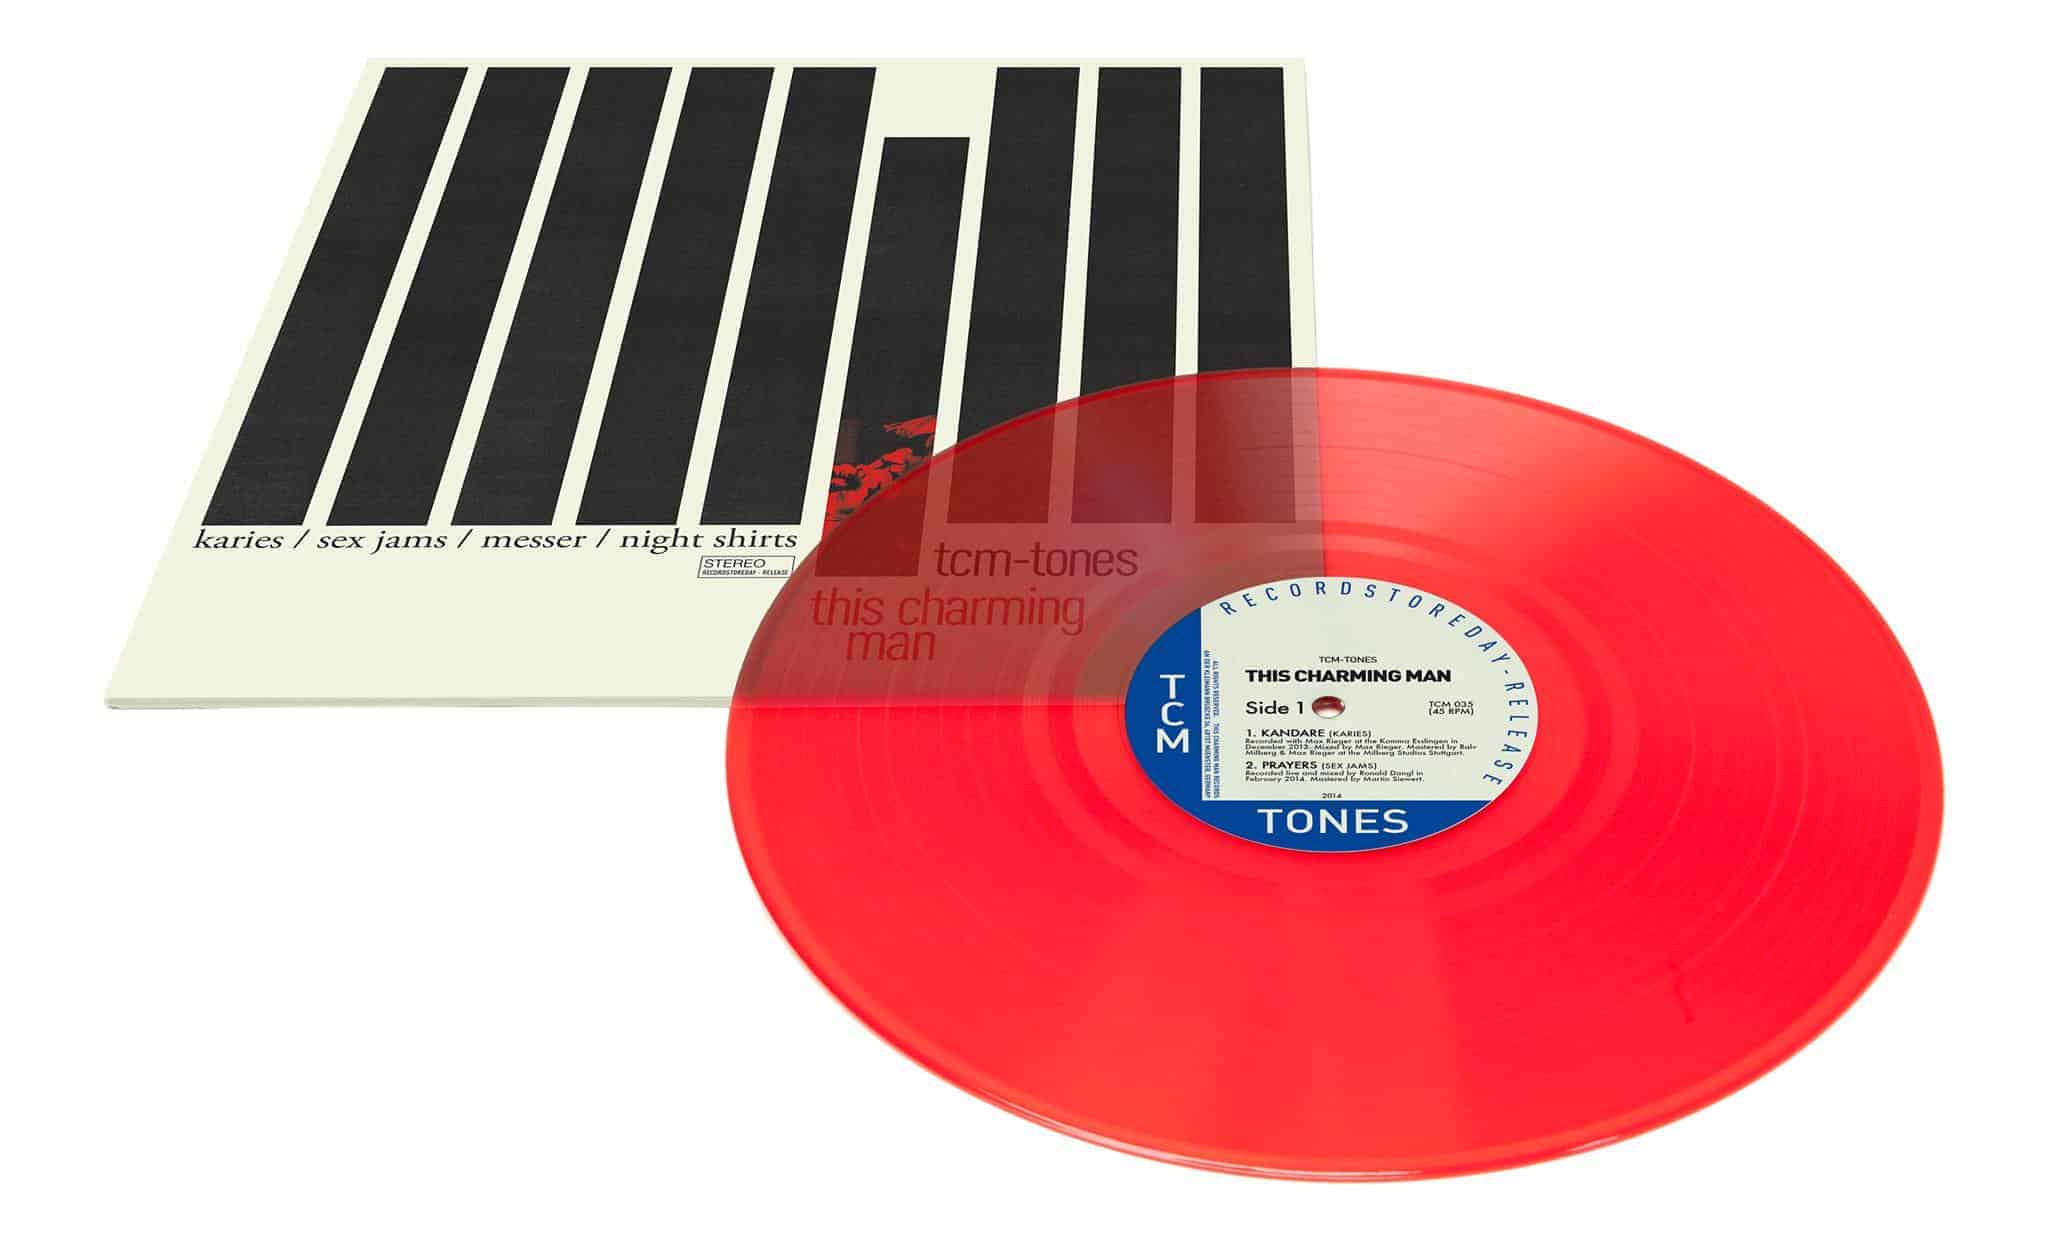 This Charming Man - TCM-Tones col.12"/digital (feat. Messer, Karies, Night Shirts und Sex Jams) Pressing info: RSD 2012 Release 100x white (mailorder exclusive - SOLD OUT), 400x clear red